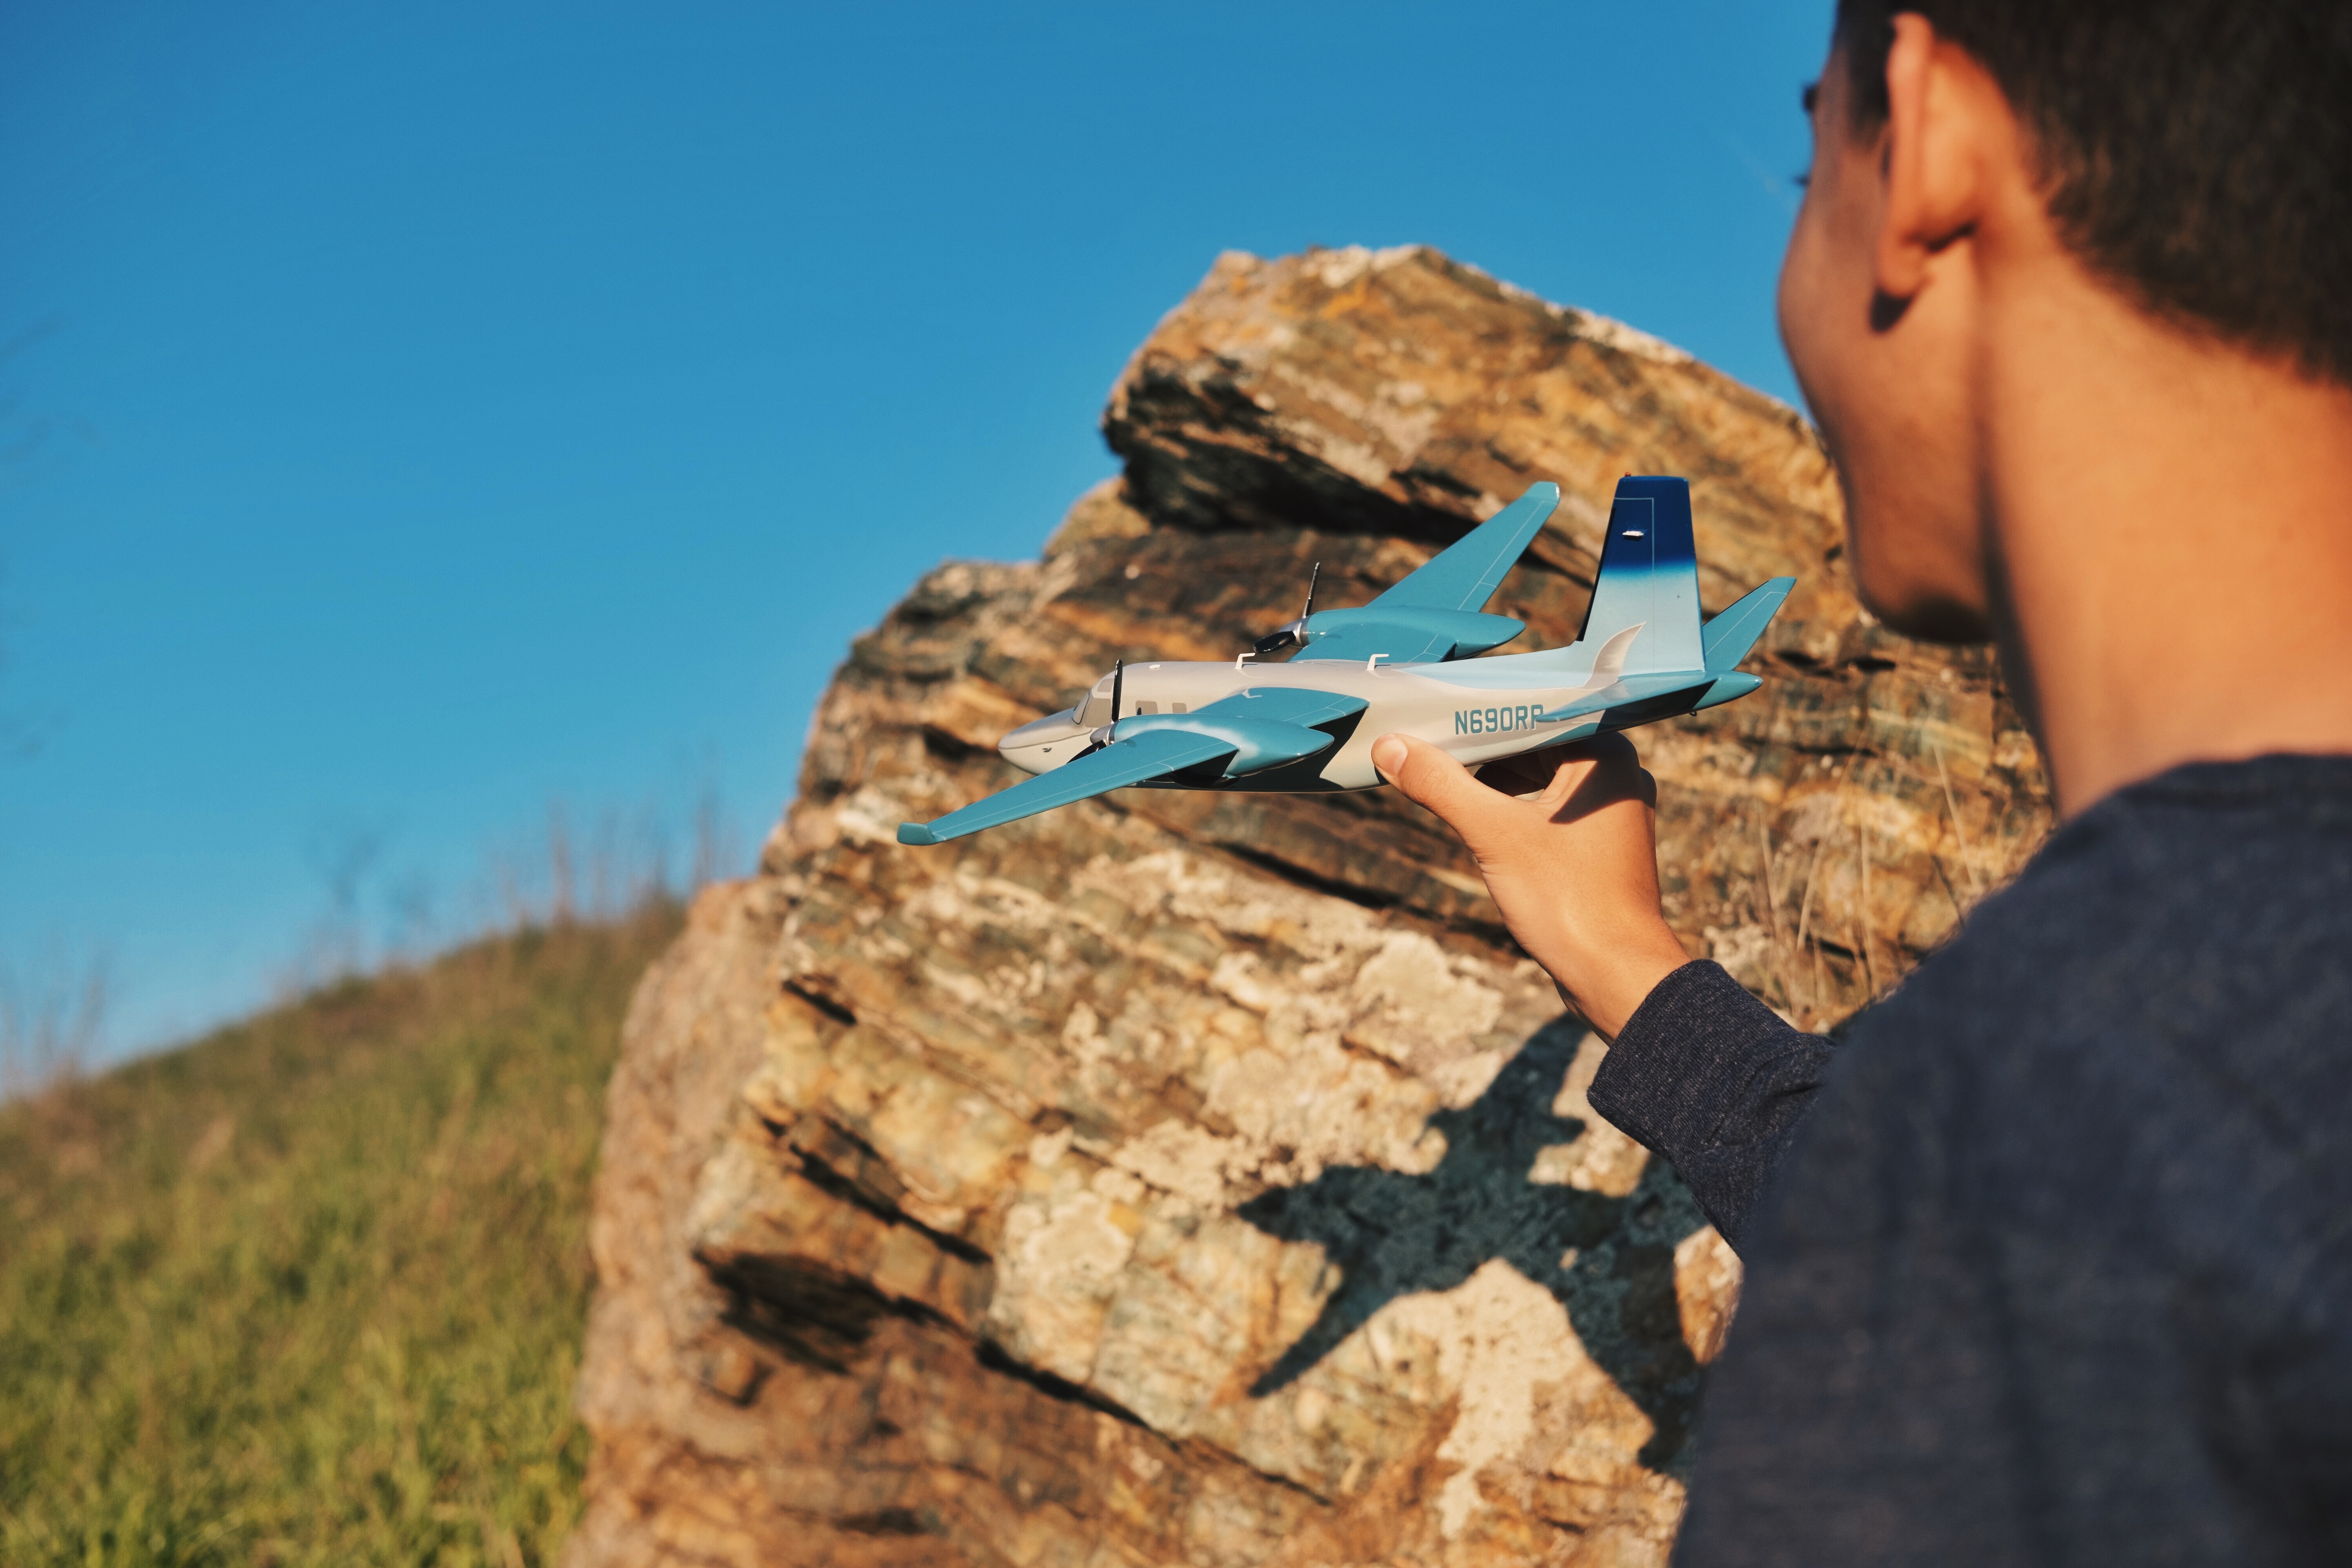 Picture of a man holding a model airplane about ready to launch it with a rock in the background 